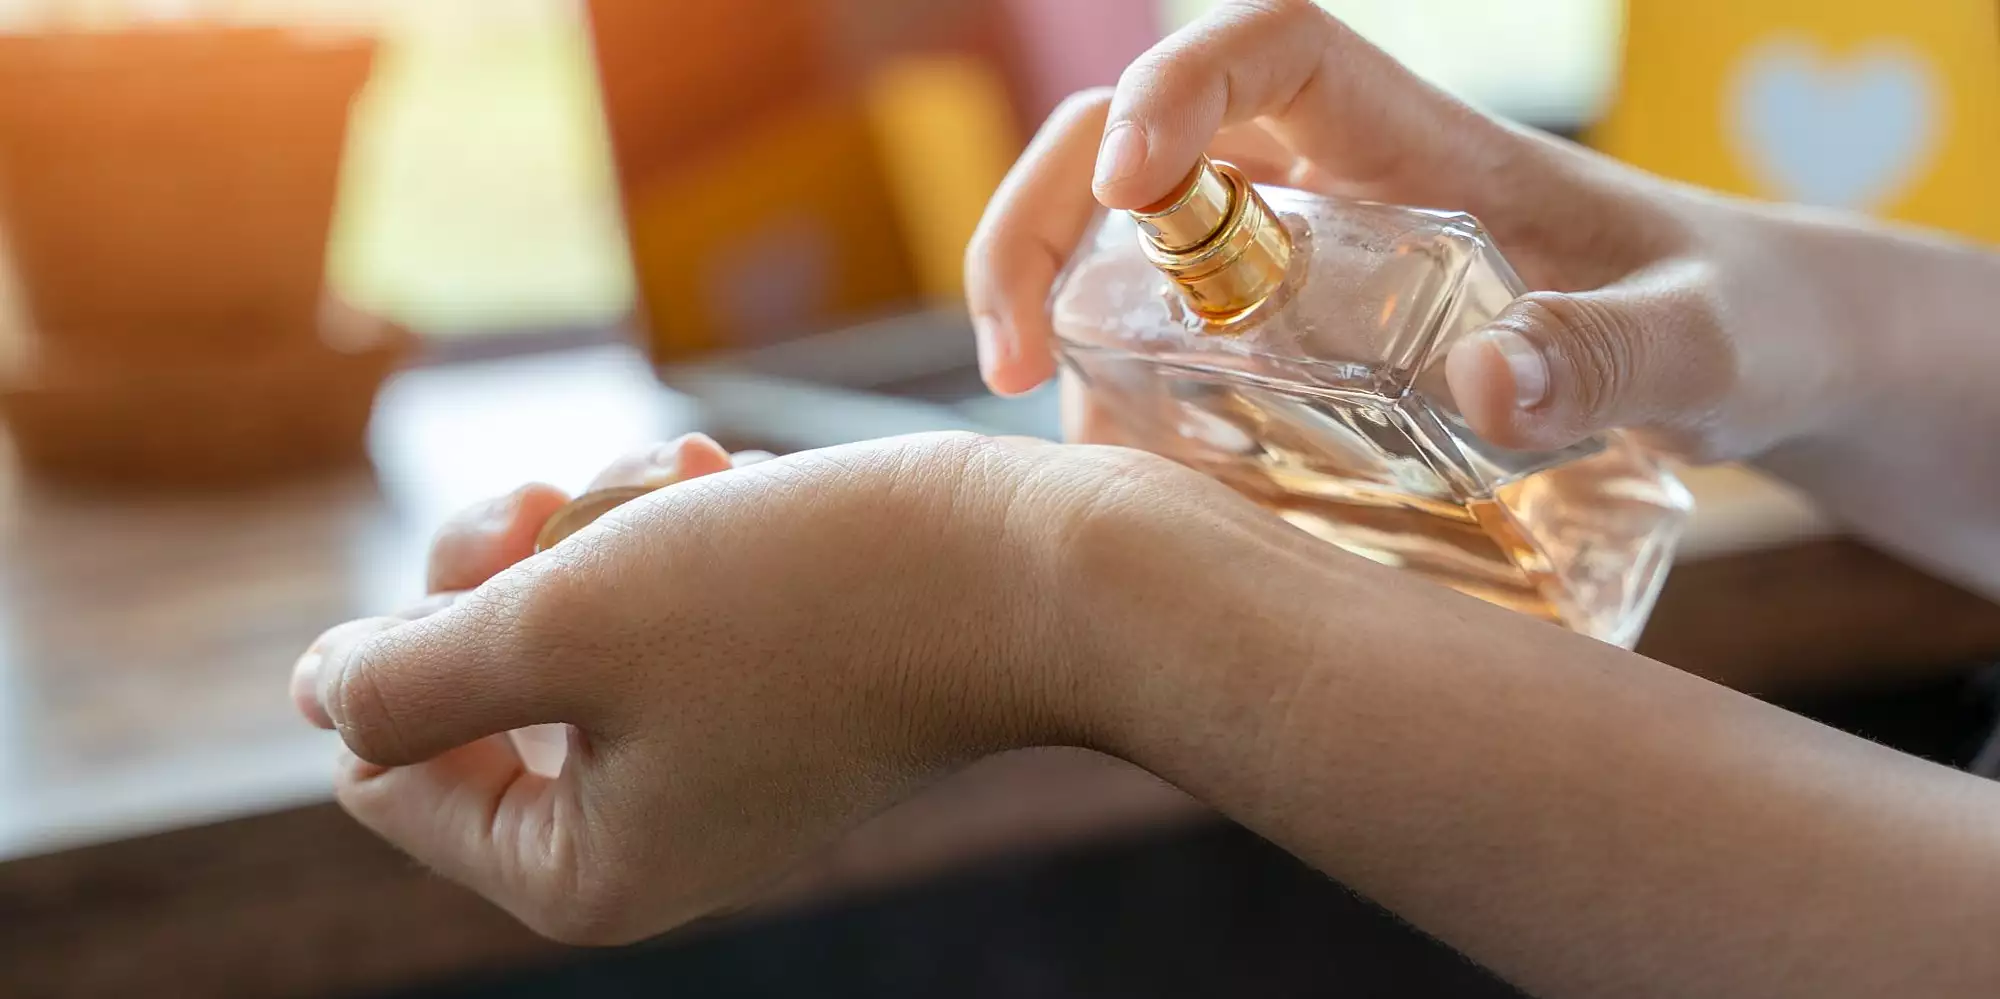 Does Your Favorite Perfume Pose Serious Health Issues?